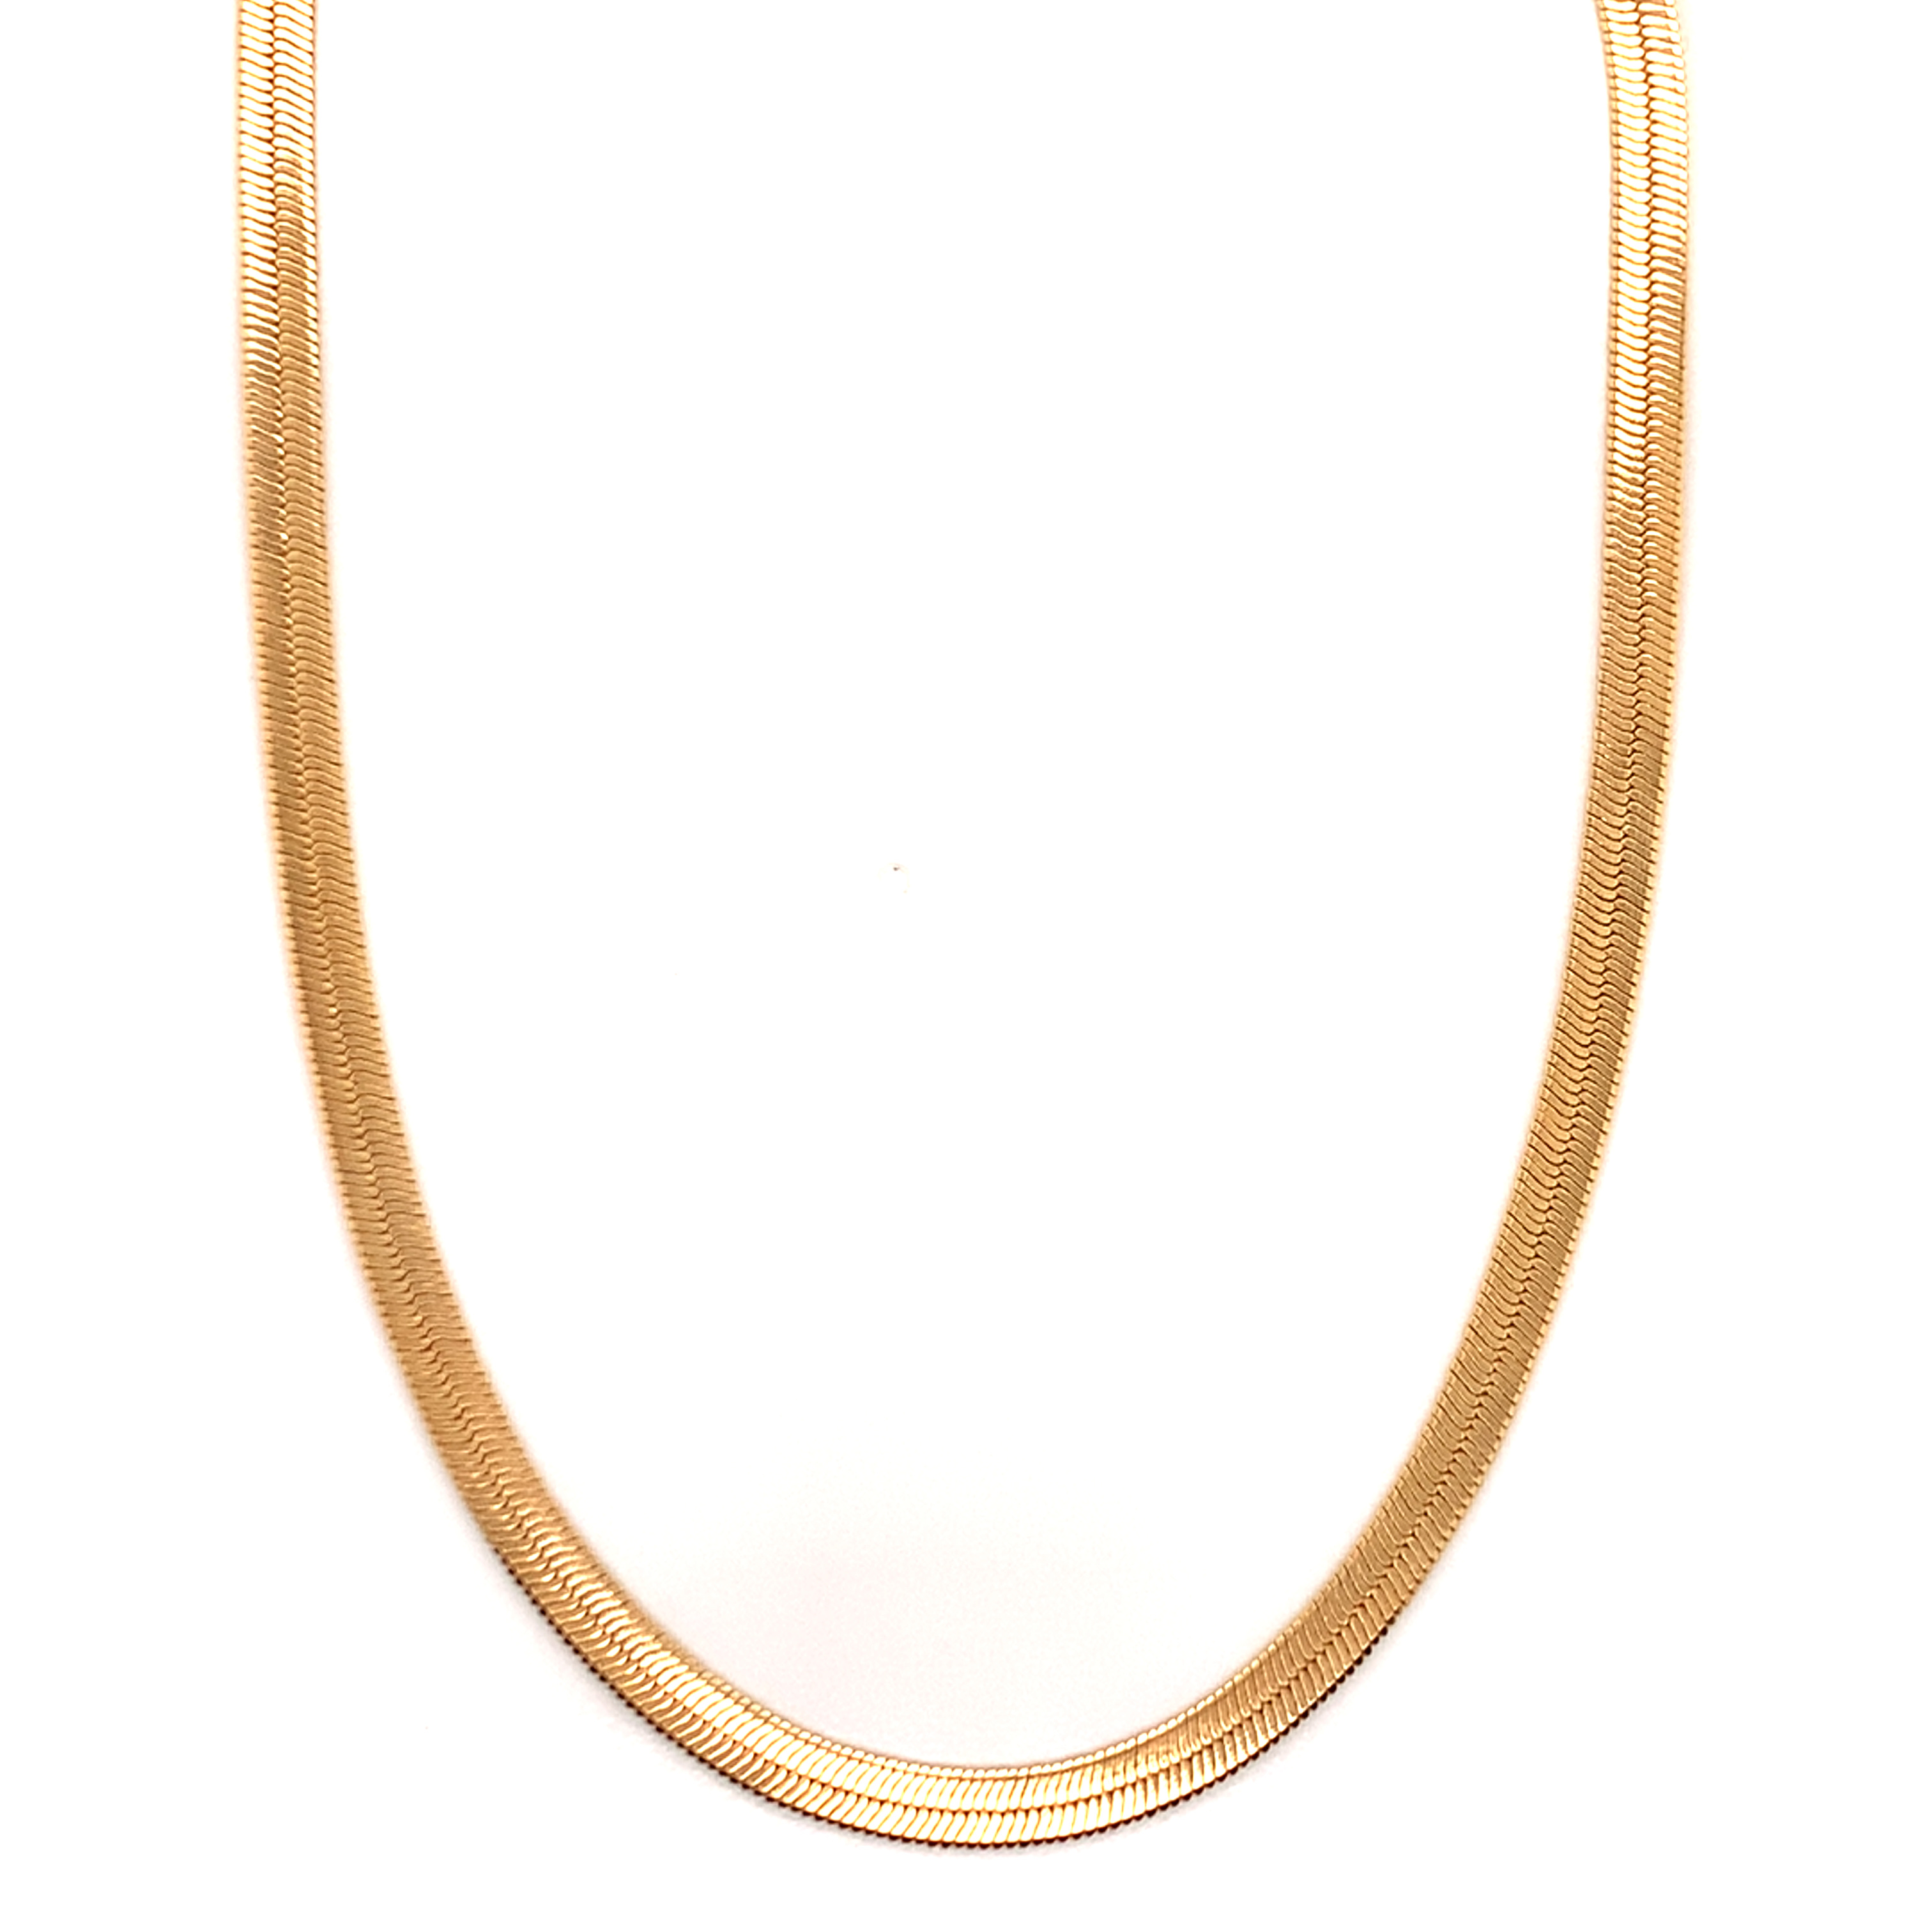 32" 4mm Herringbone Belly Chain with 2" Extension - Gold Filled